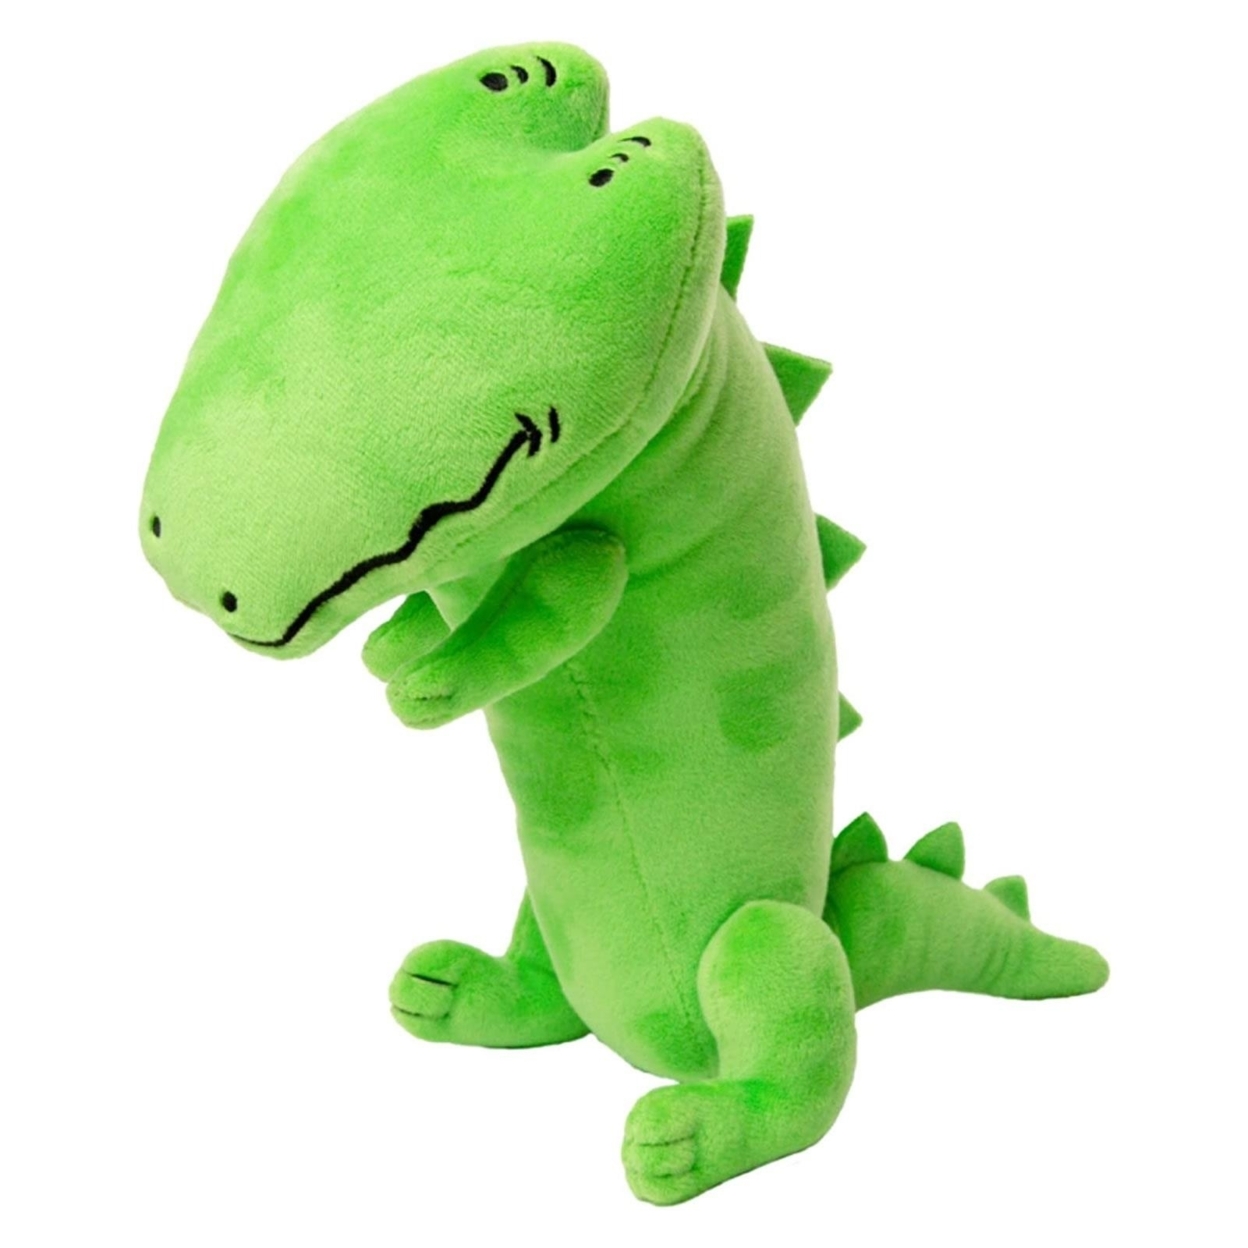 Lyle Lyle The Crocodile Plush 15 Doll Huggable Storybook Book Character Mighty Mojo